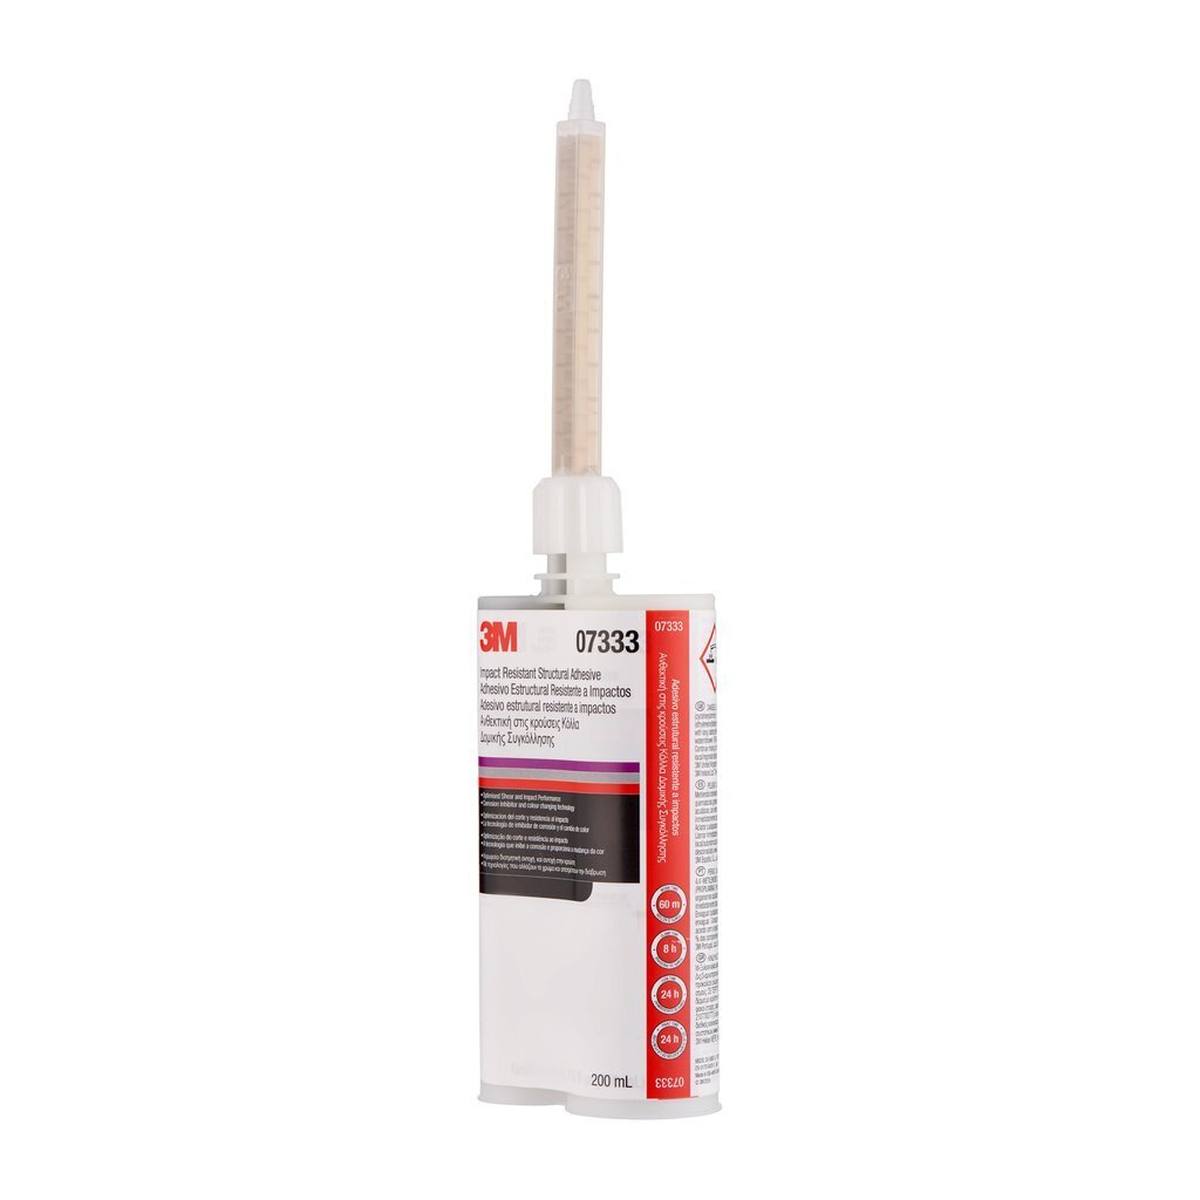 3M Structural adhesive, 07333 Impact-resistant structural adhesive, double cartridge, 200 ml, incl. 2 nozzles and 1 brush, purple/silver